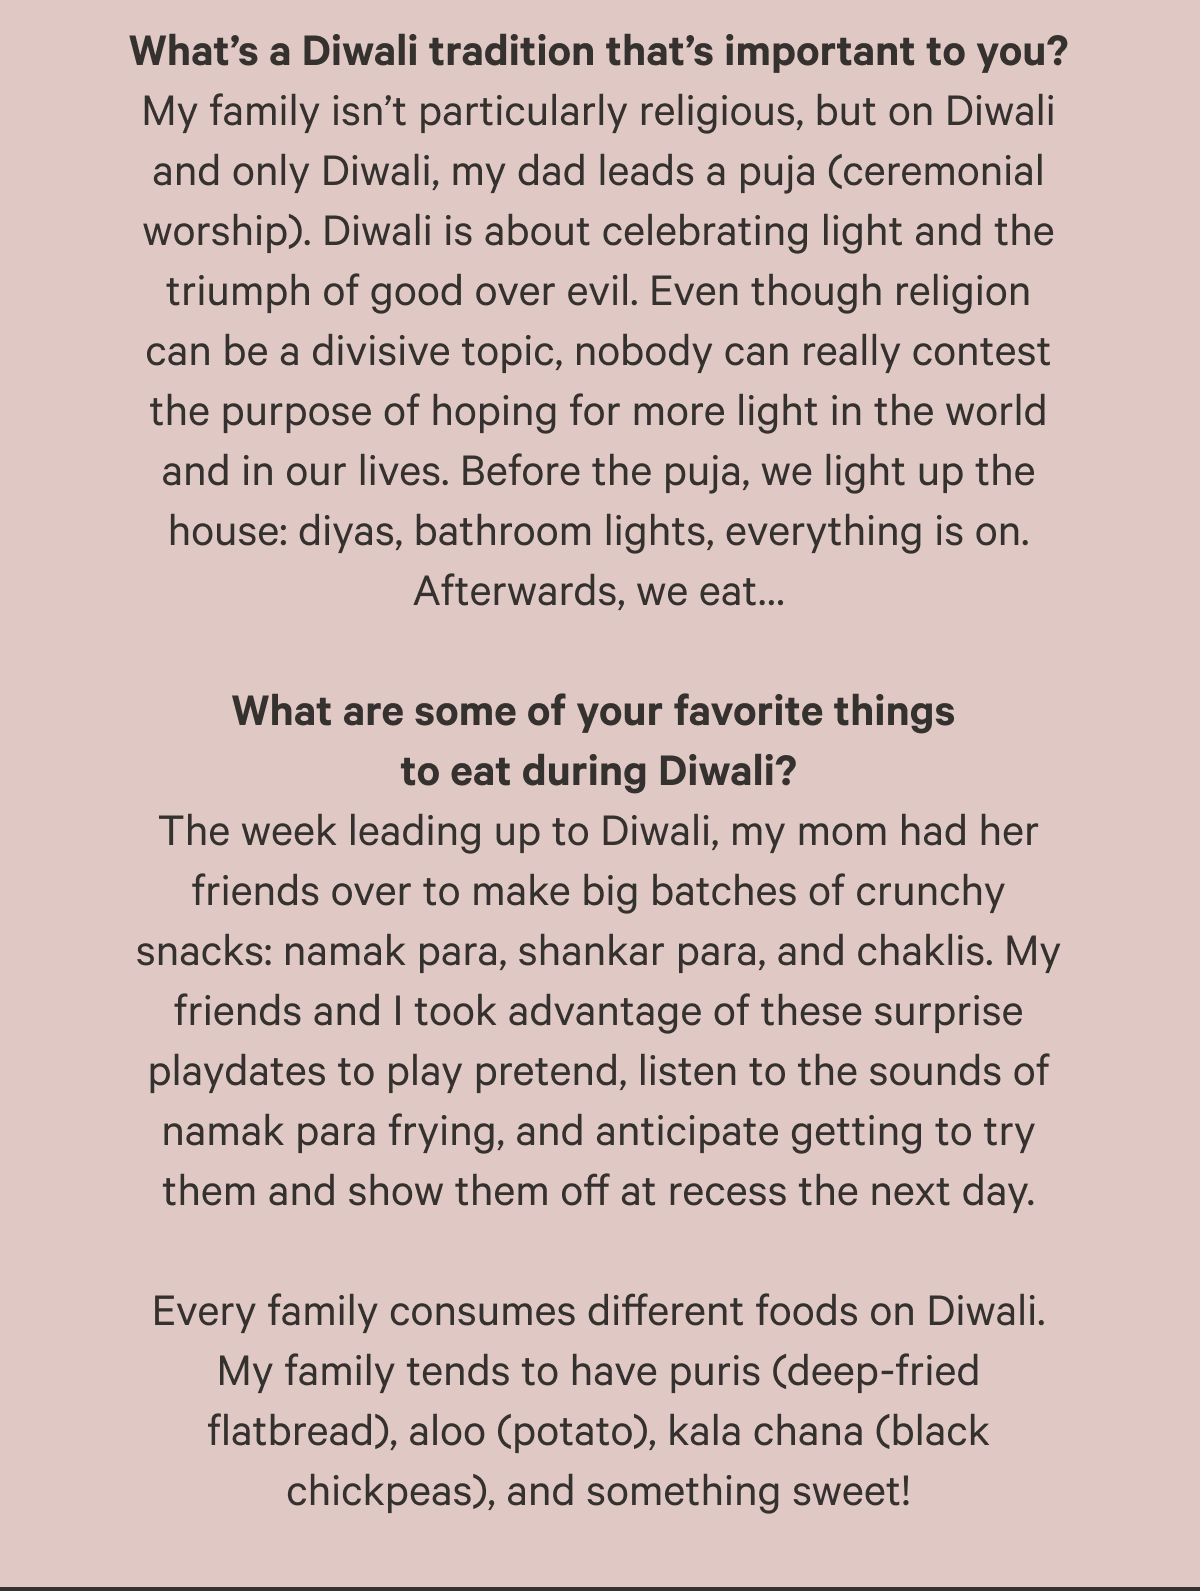 What’s a Diwali tradition that’s important to you? My family isn’t particularly religious, but on Diwali and only Diwali, my dad leads a puja (ceremonial worship). Diwali is about celebrating light and the triumph of good over evil. Even though religion can be a divisive topic, nobody can really contest the purpose of hoping for more light in the world and in our lives. Before the puja, we light up the house: diyas, bathroom lights, everything is on. Afterwards, we eat…  What are some of your favorite things to eat during Diwali? The week leading up to Diwali, my mom had her friends over to make big batches of crunchy snacks: namak para, shankar para, and chaklis. My friends and I took advantage of these surprise playdates to play pretend, listen to the sounds of namak para frying, and anticipate getting to try them and show them off at recess the next day.  Every family consumes different foods on Diwali. My family tends to have puris (deep-fried flatbread), aloo (potato), kala chana (black chickpeas), and something sweet!